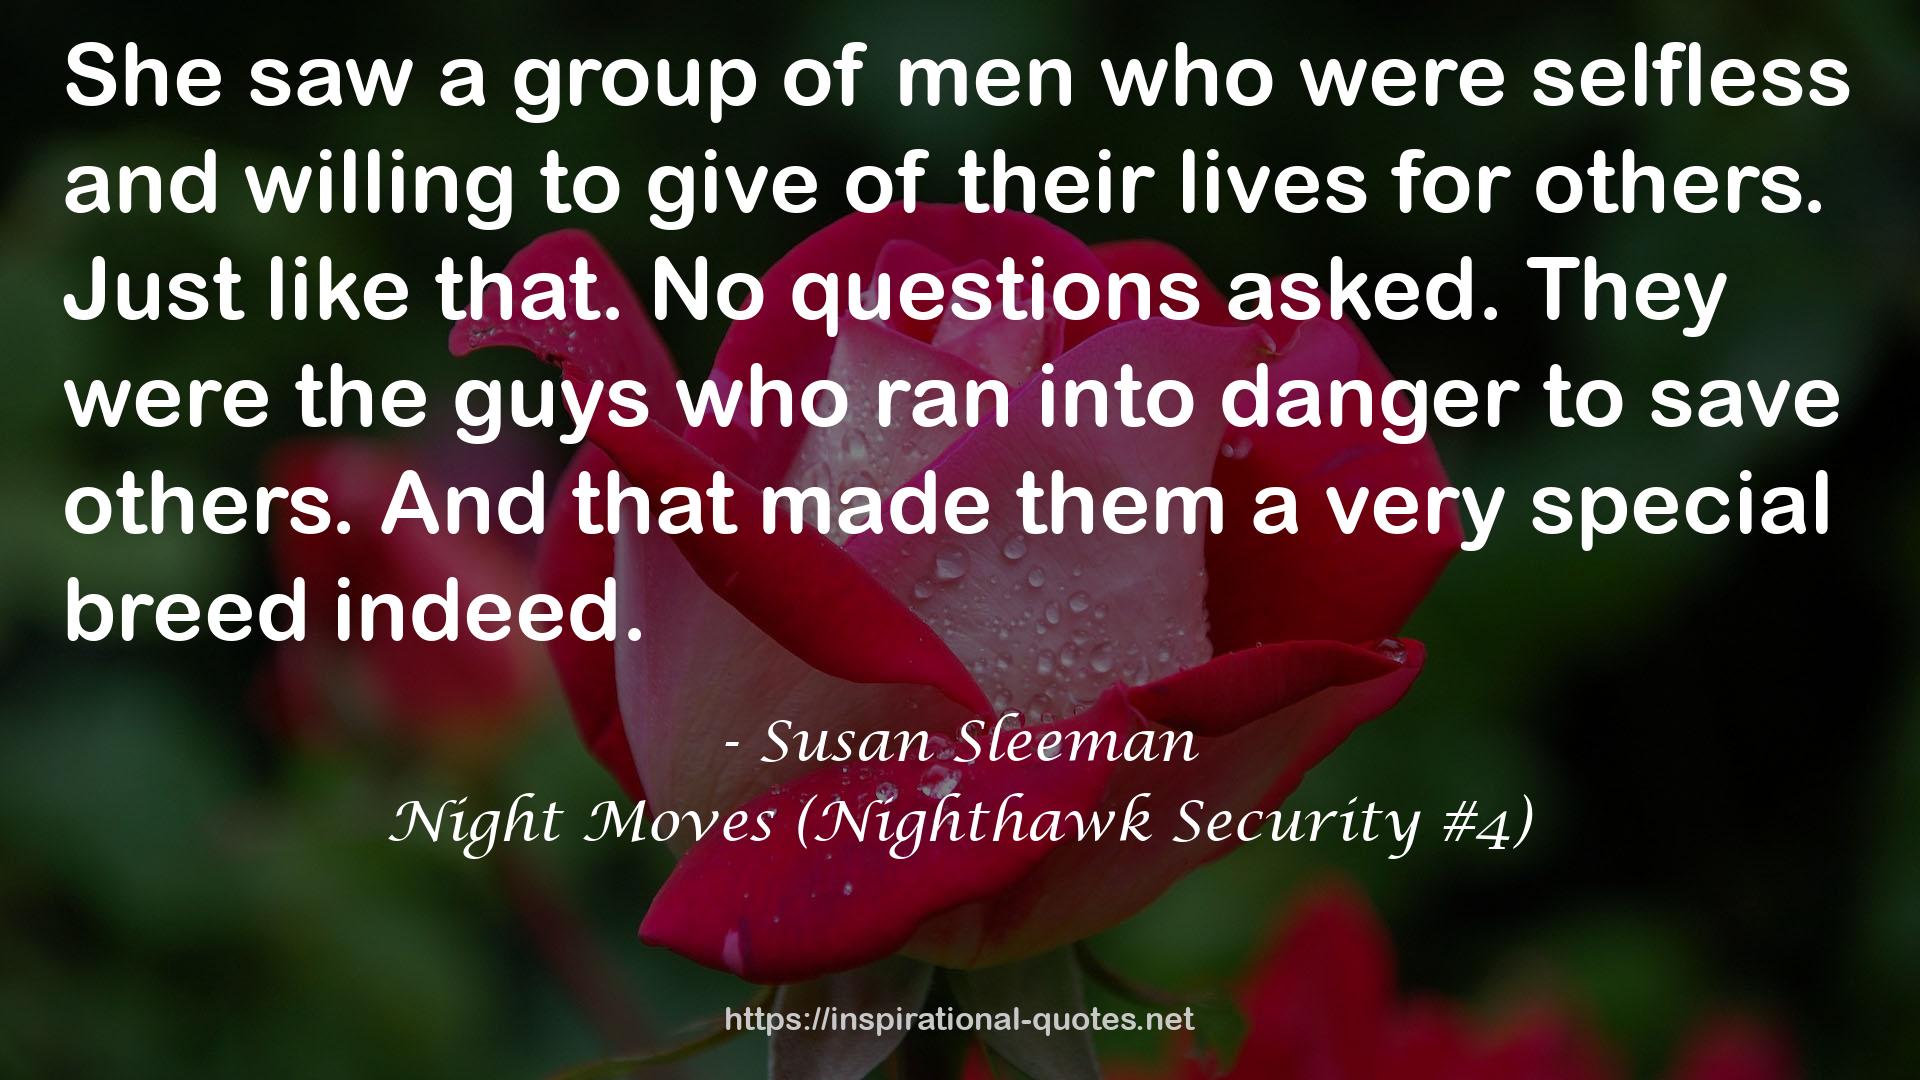 Night Moves (Nighthawk Security #4) QUOTES